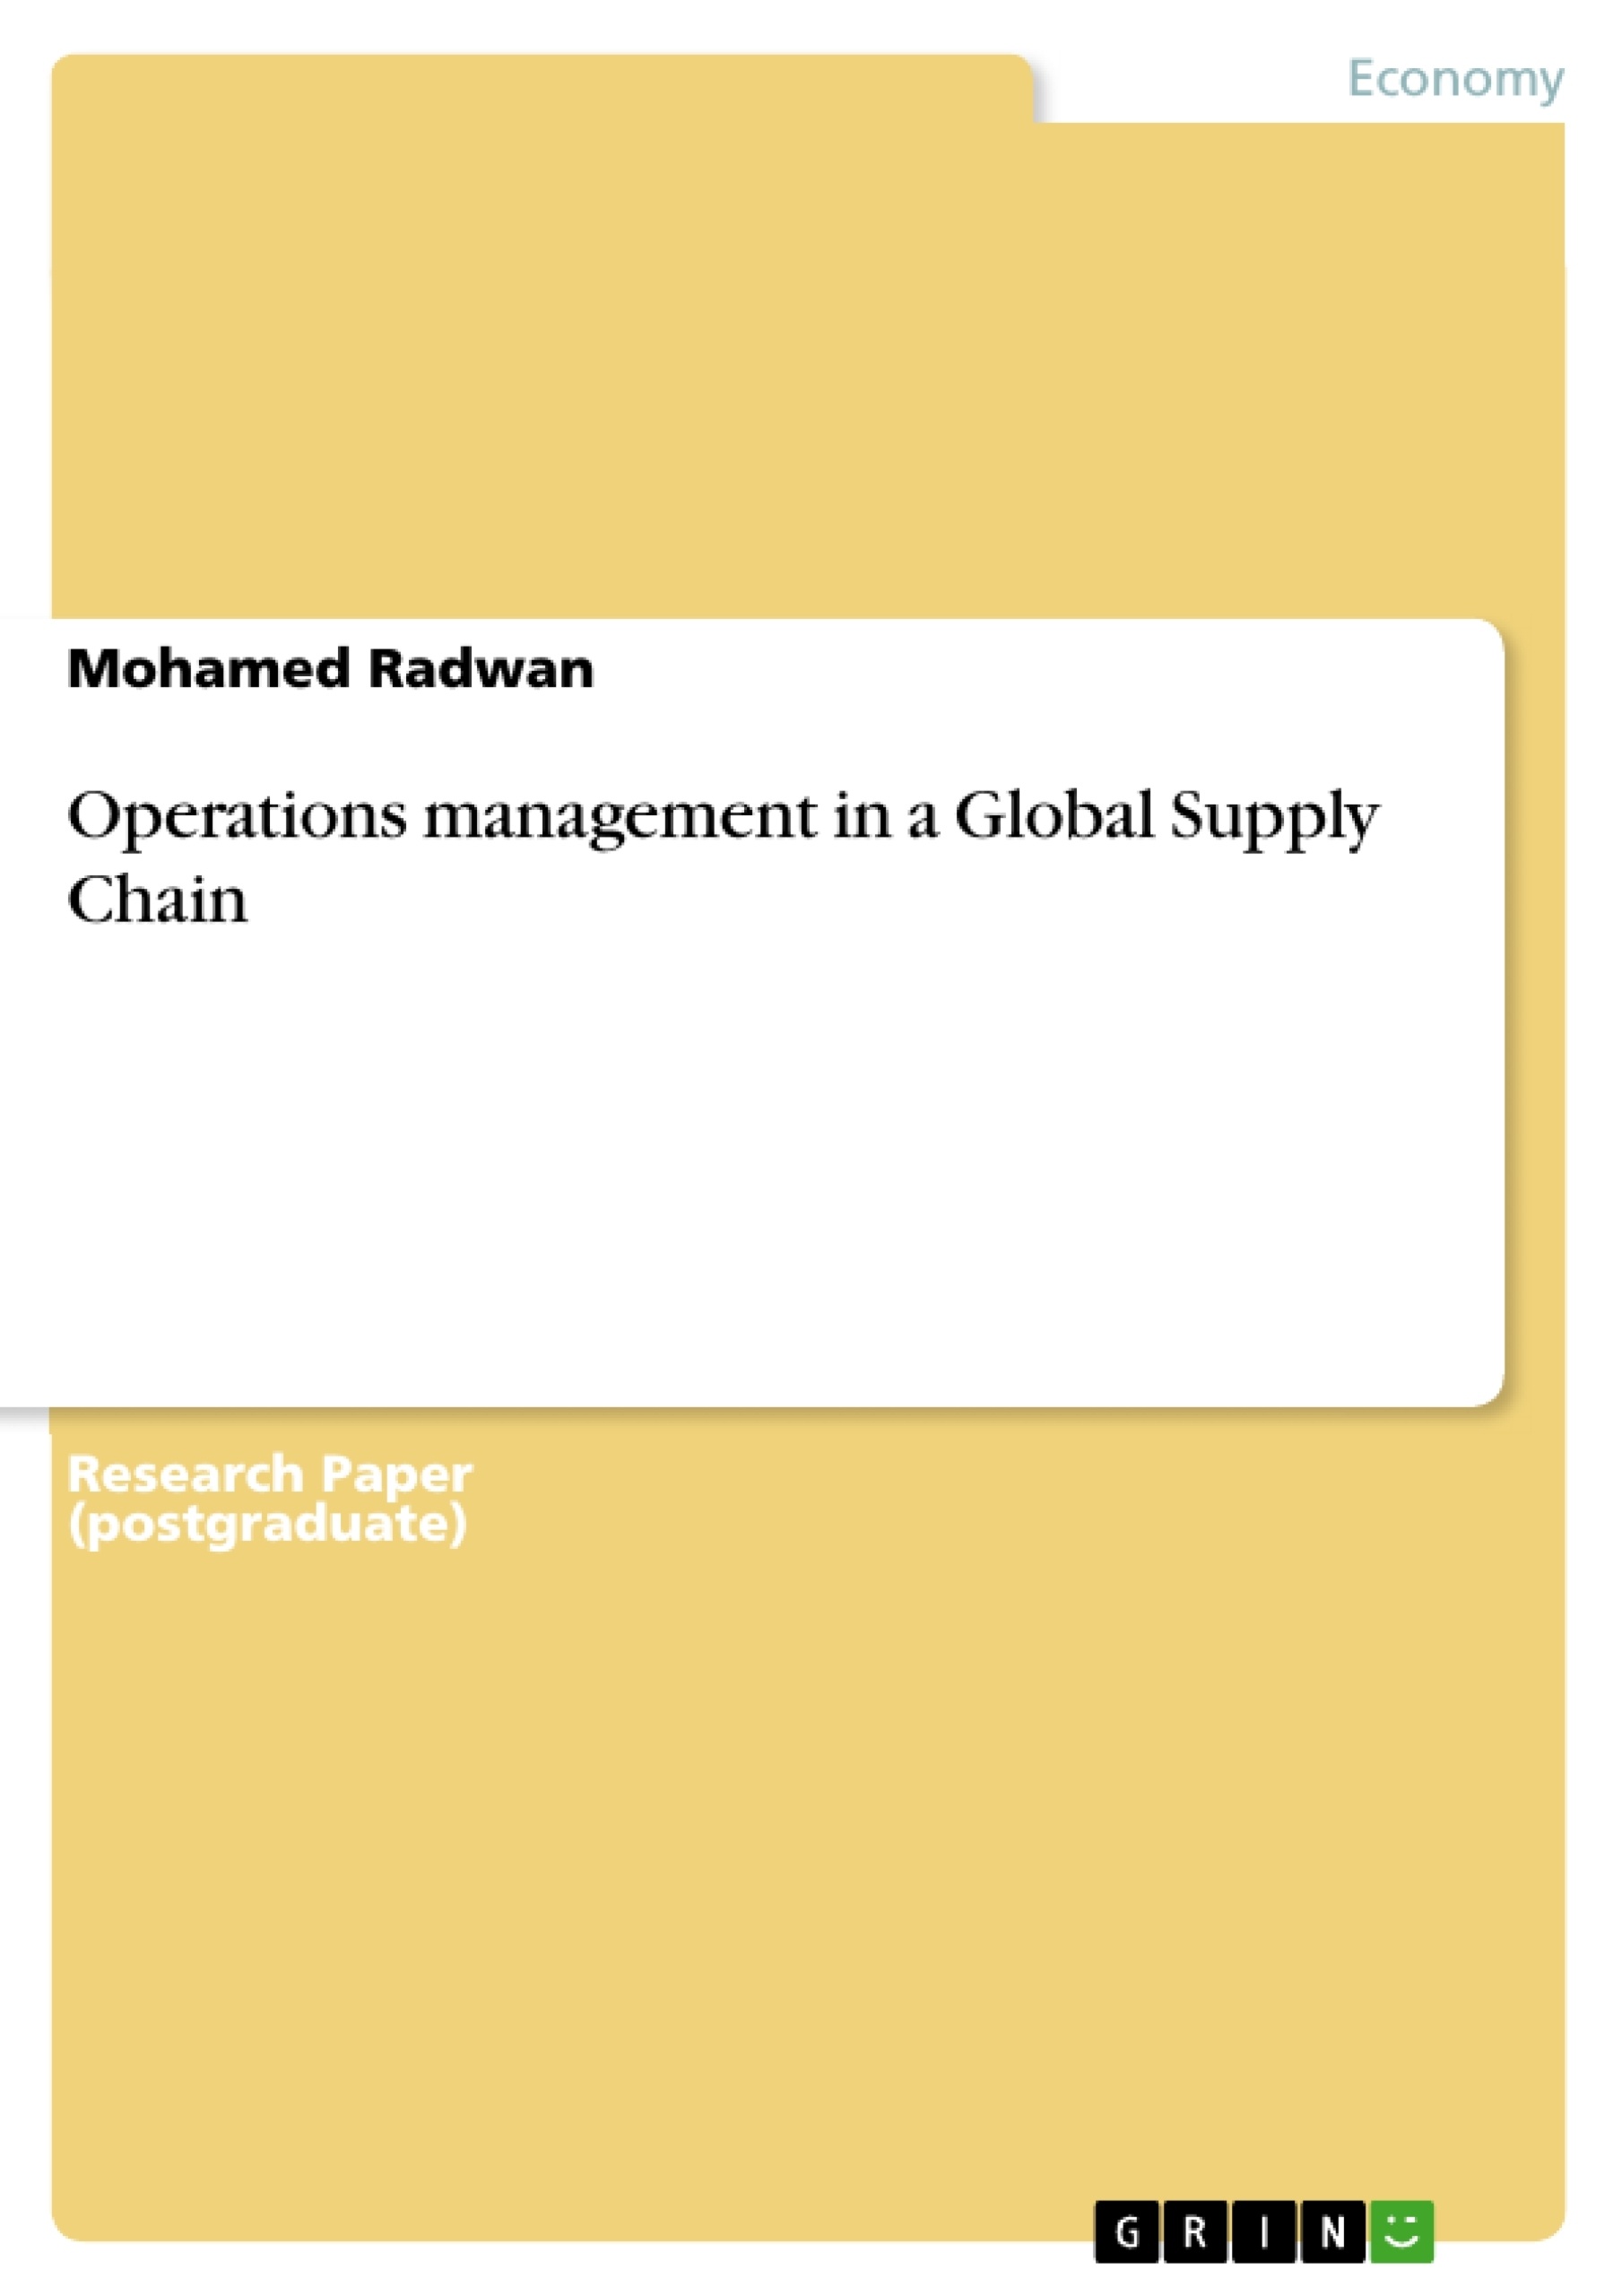 Título: Operations management in a Global Supply Chain